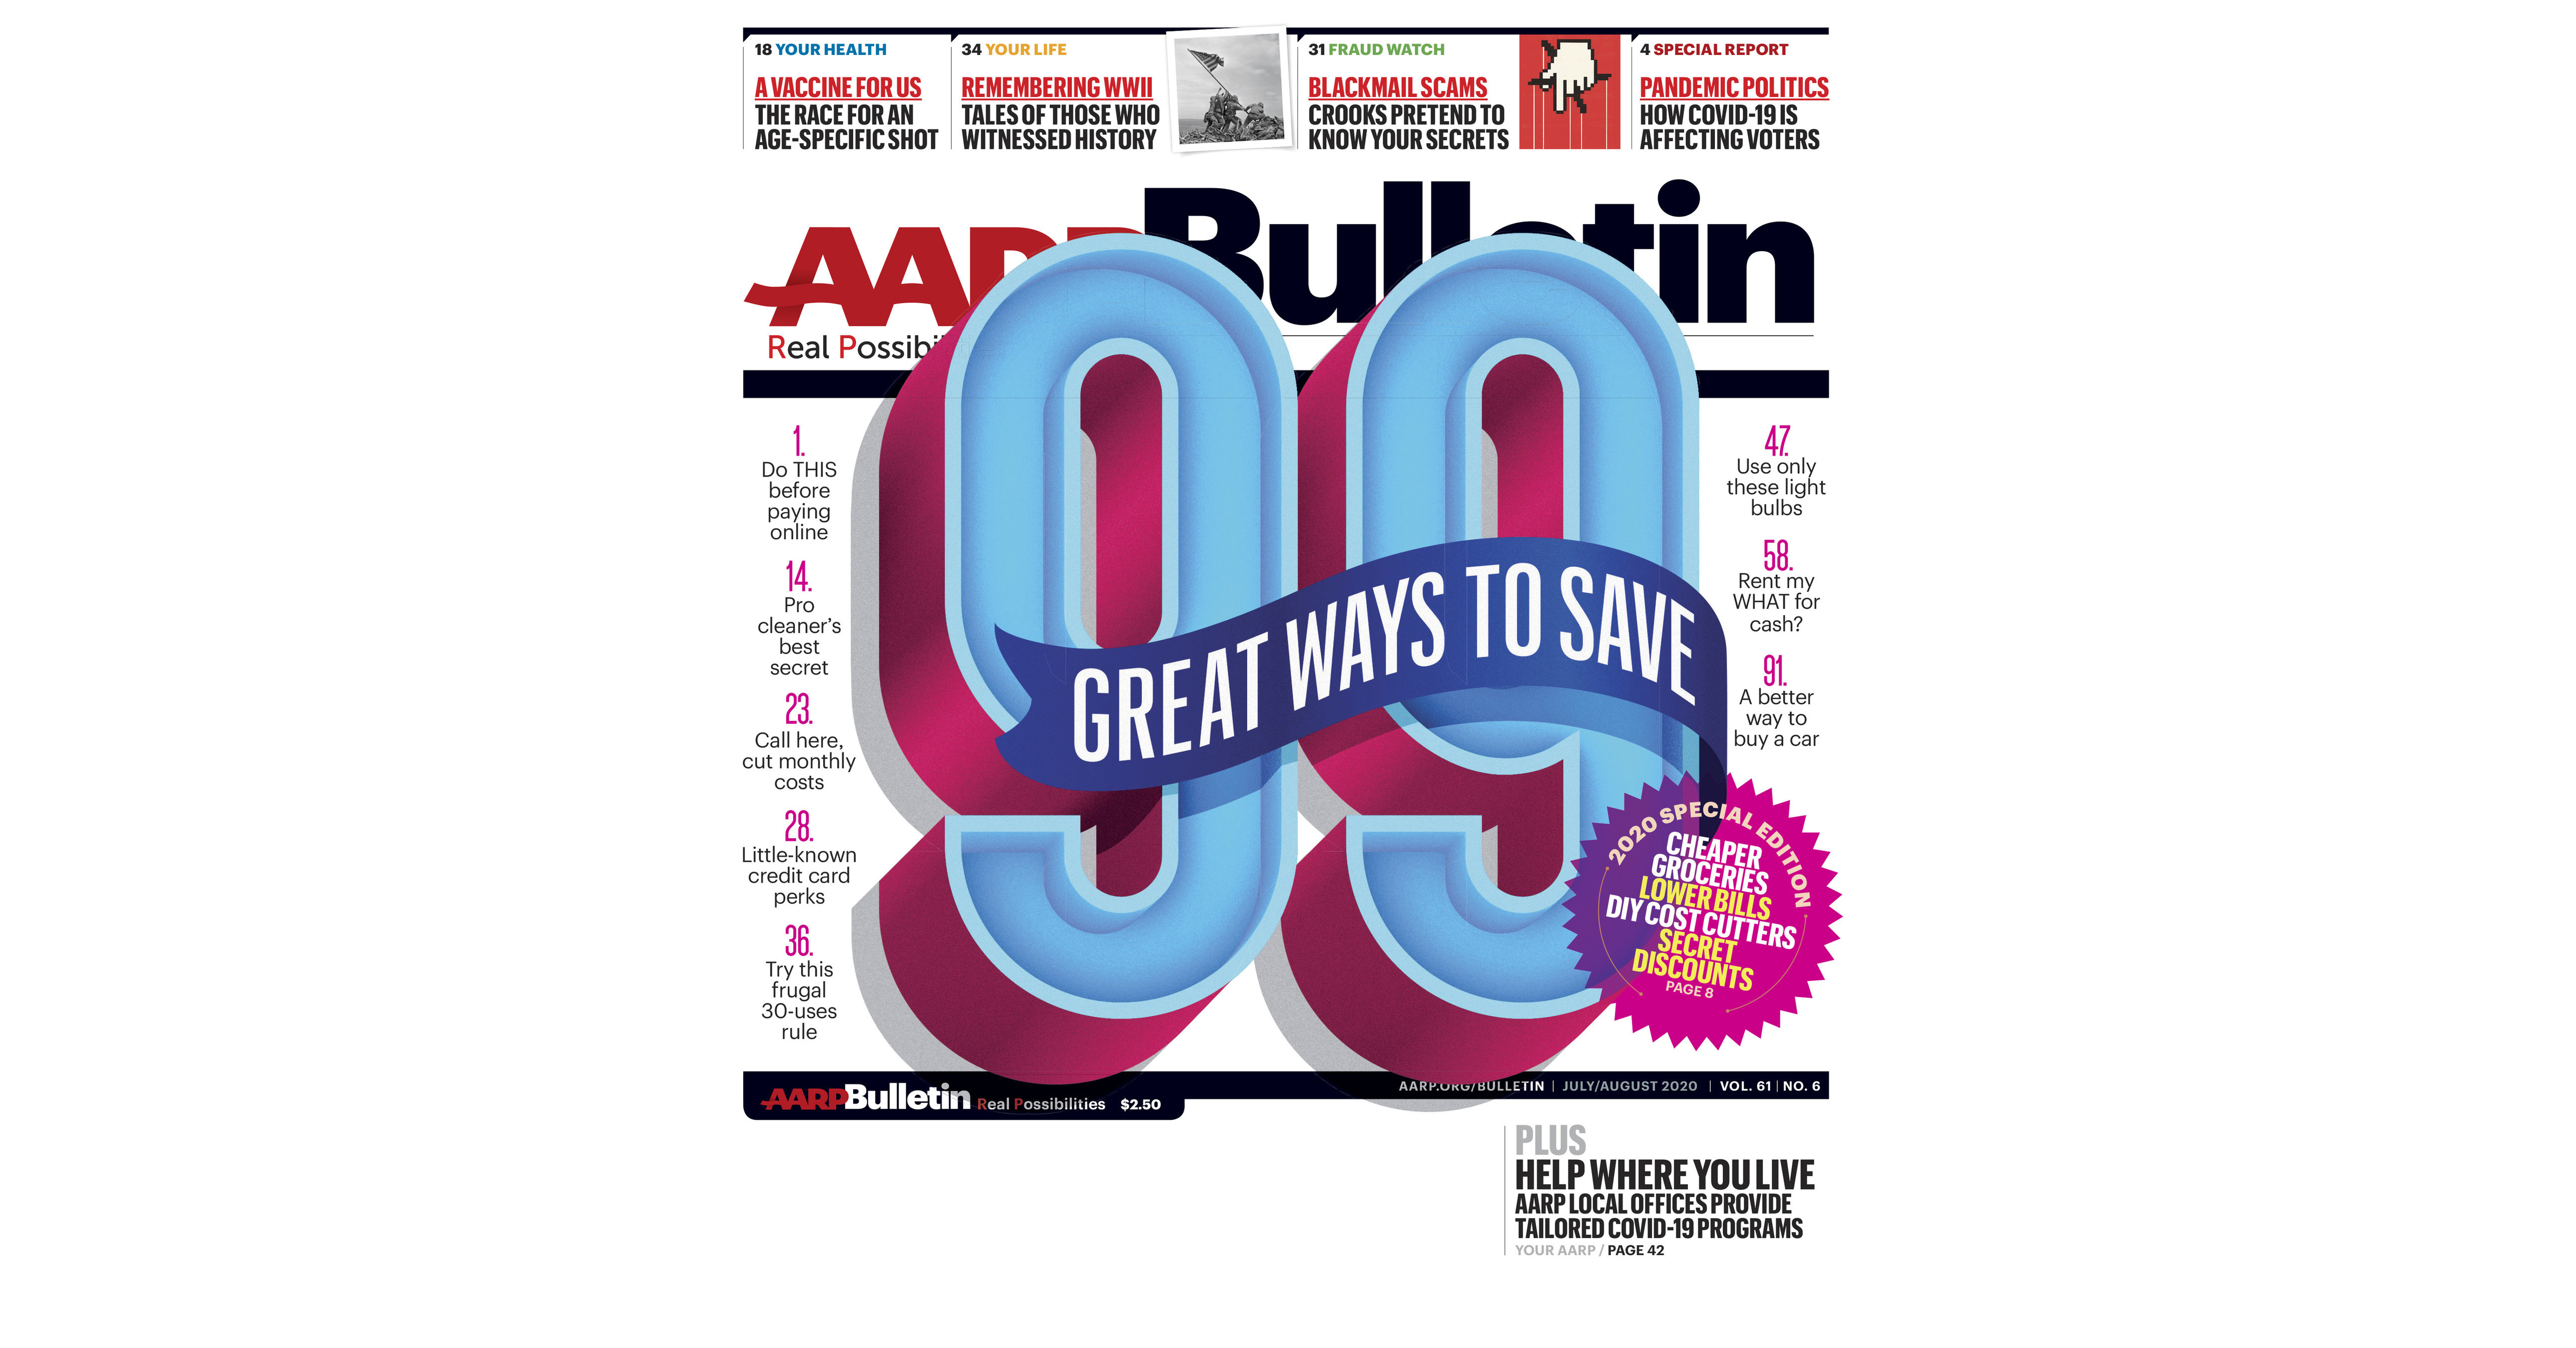 AARP Bulletin Reveals 99 Clever Ways to Save